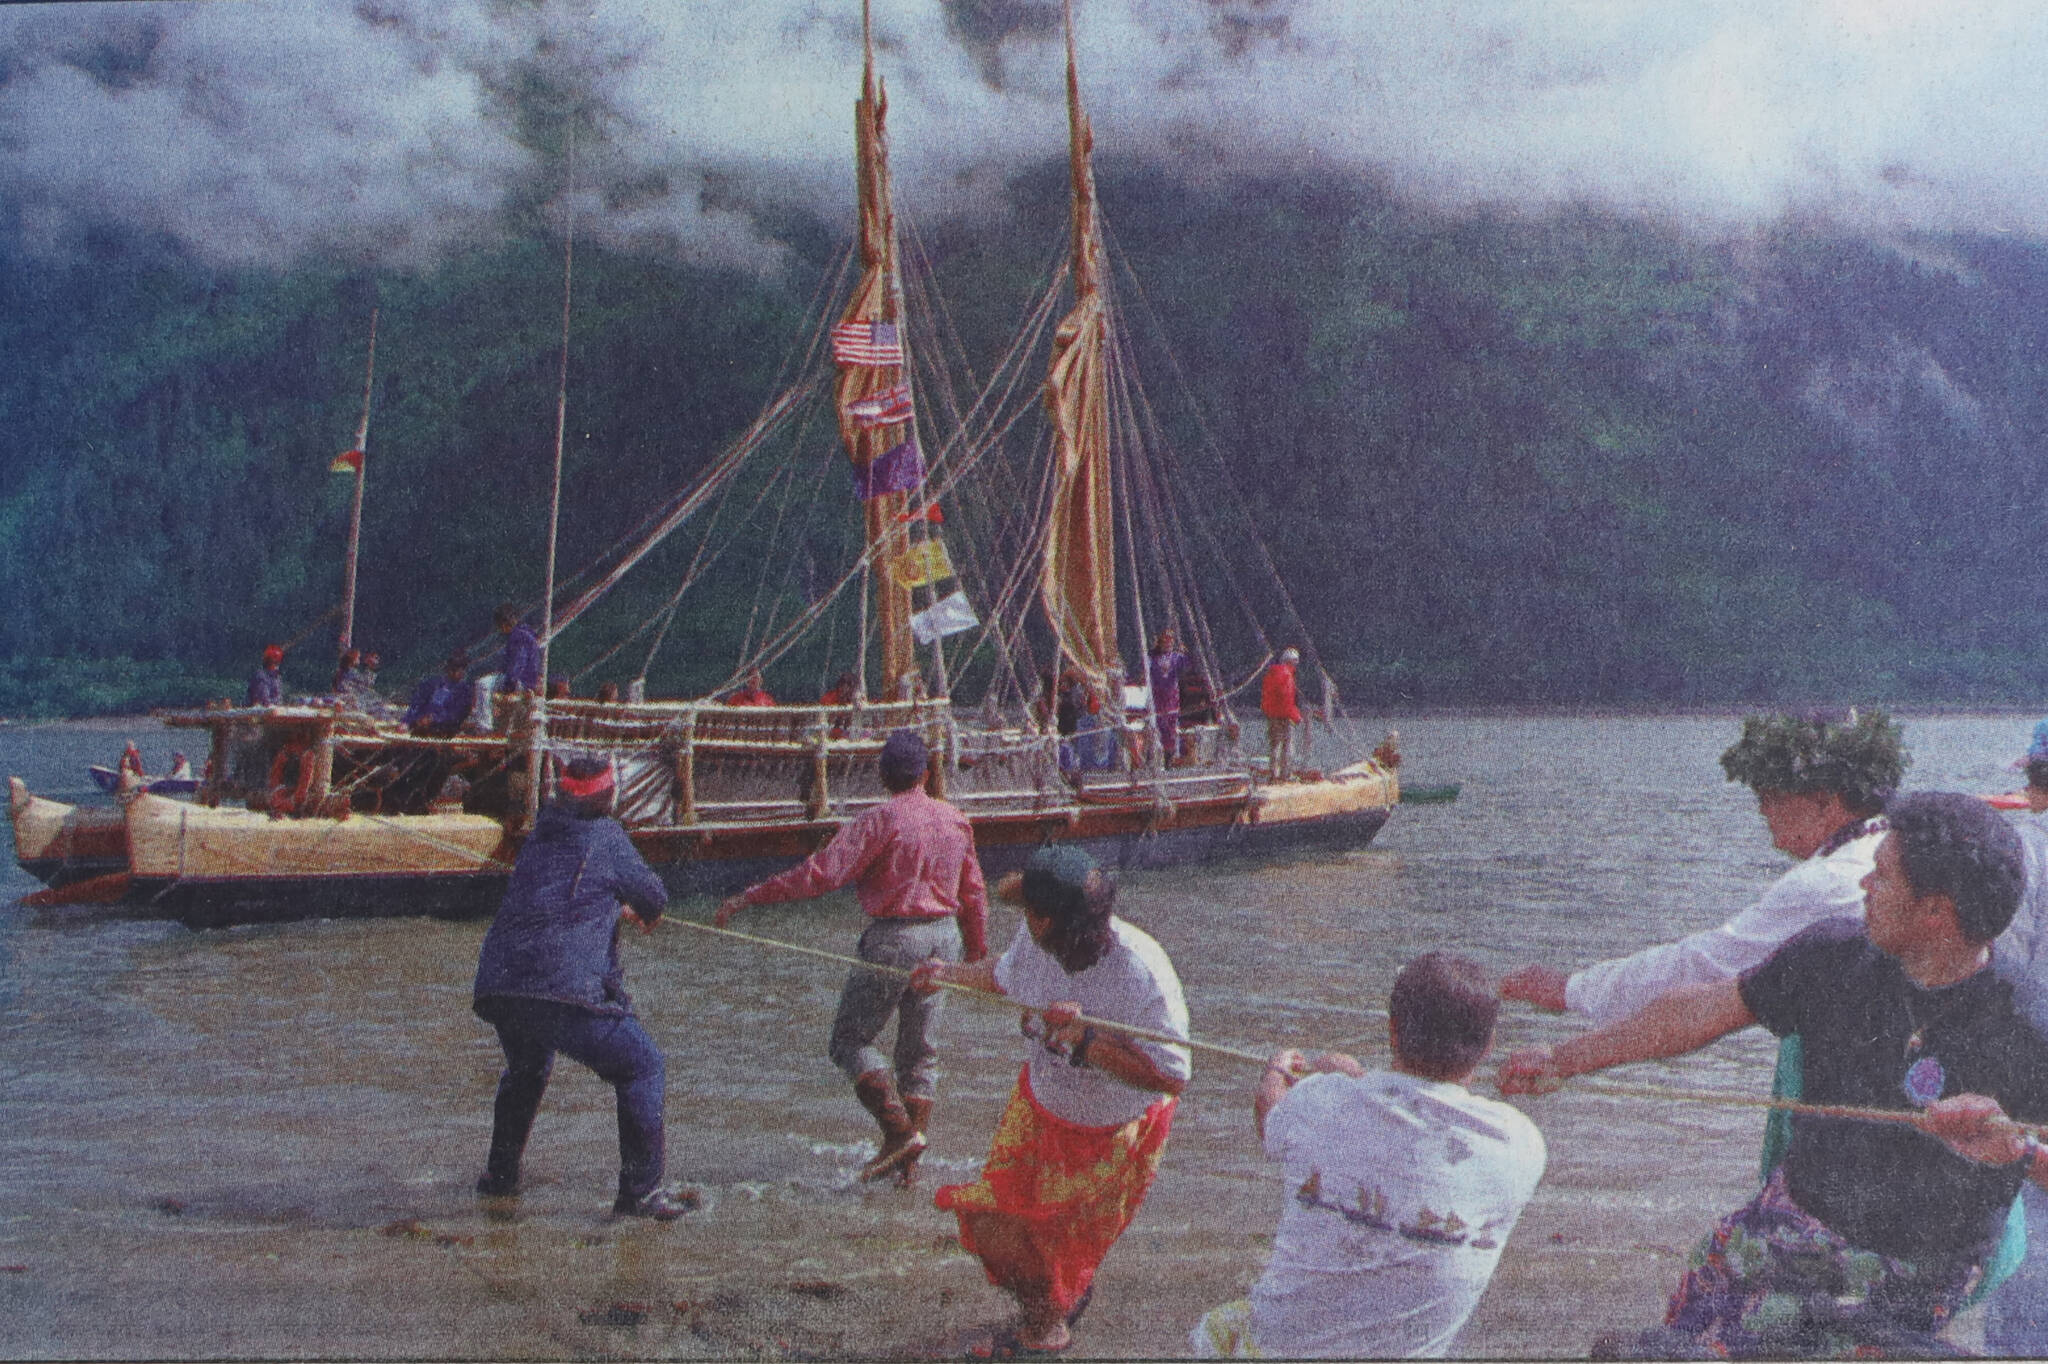 Members of Juneau’s Hawaiian and Native communities help pull the Hawai’iloa closer to shore at Sandy Beach on July 14, 1995. (Brian Wallace / Juneau Empire Archives)